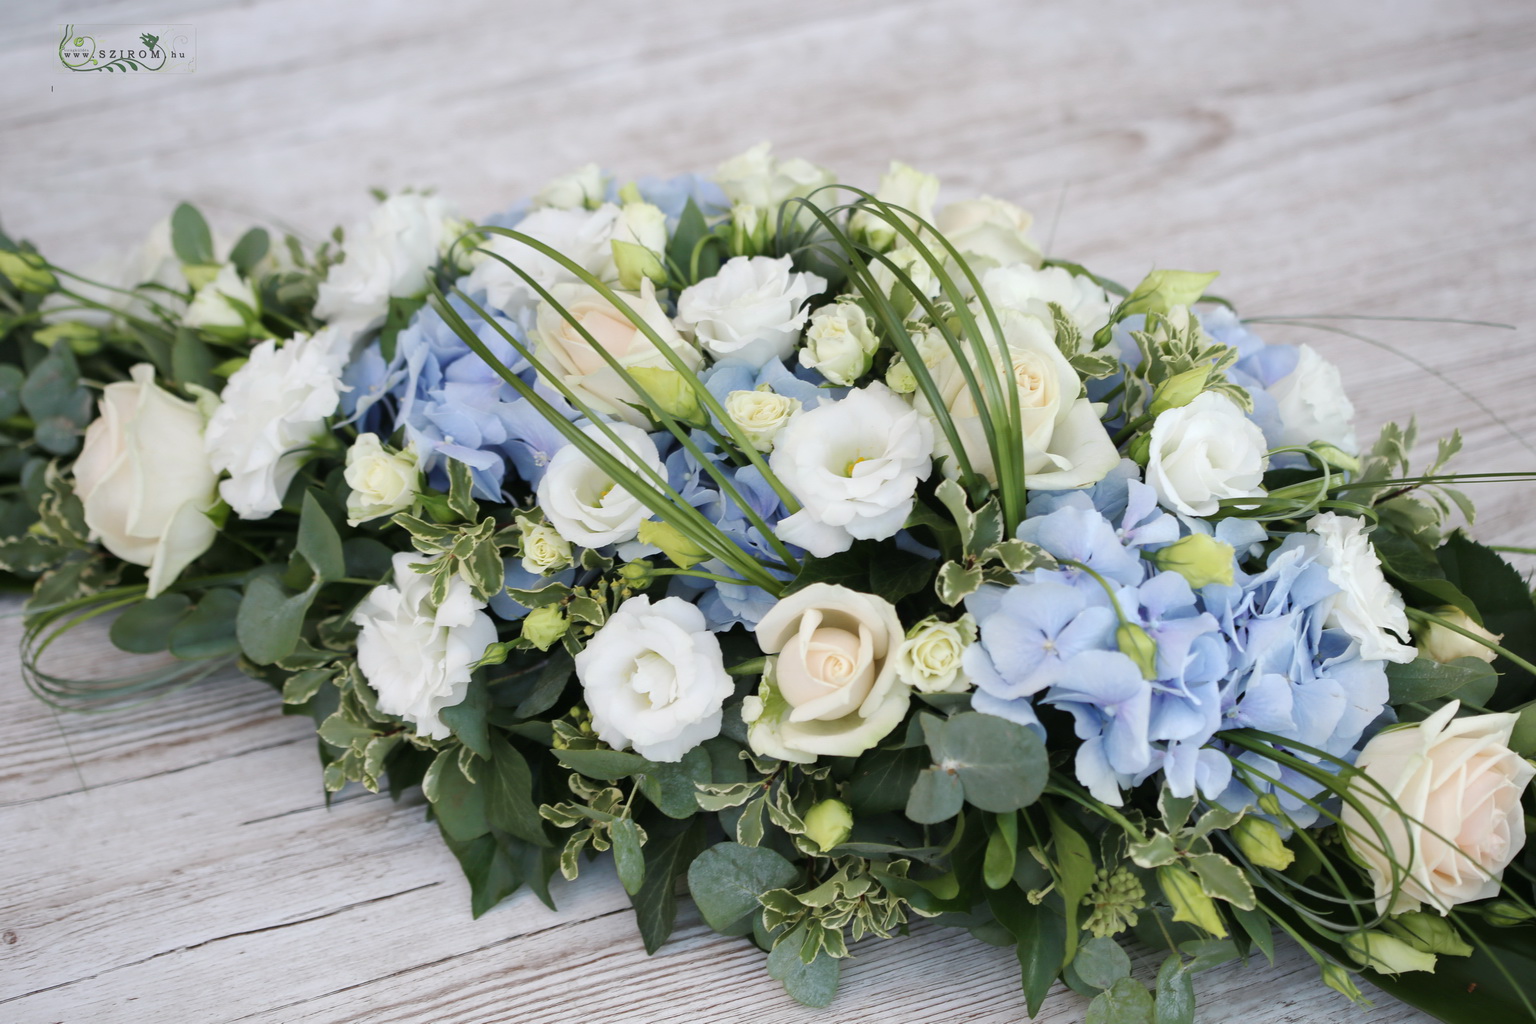 flower delivery Budapest - Main table centerpiece (hydrangea, lisianthus, rose, white, blue)